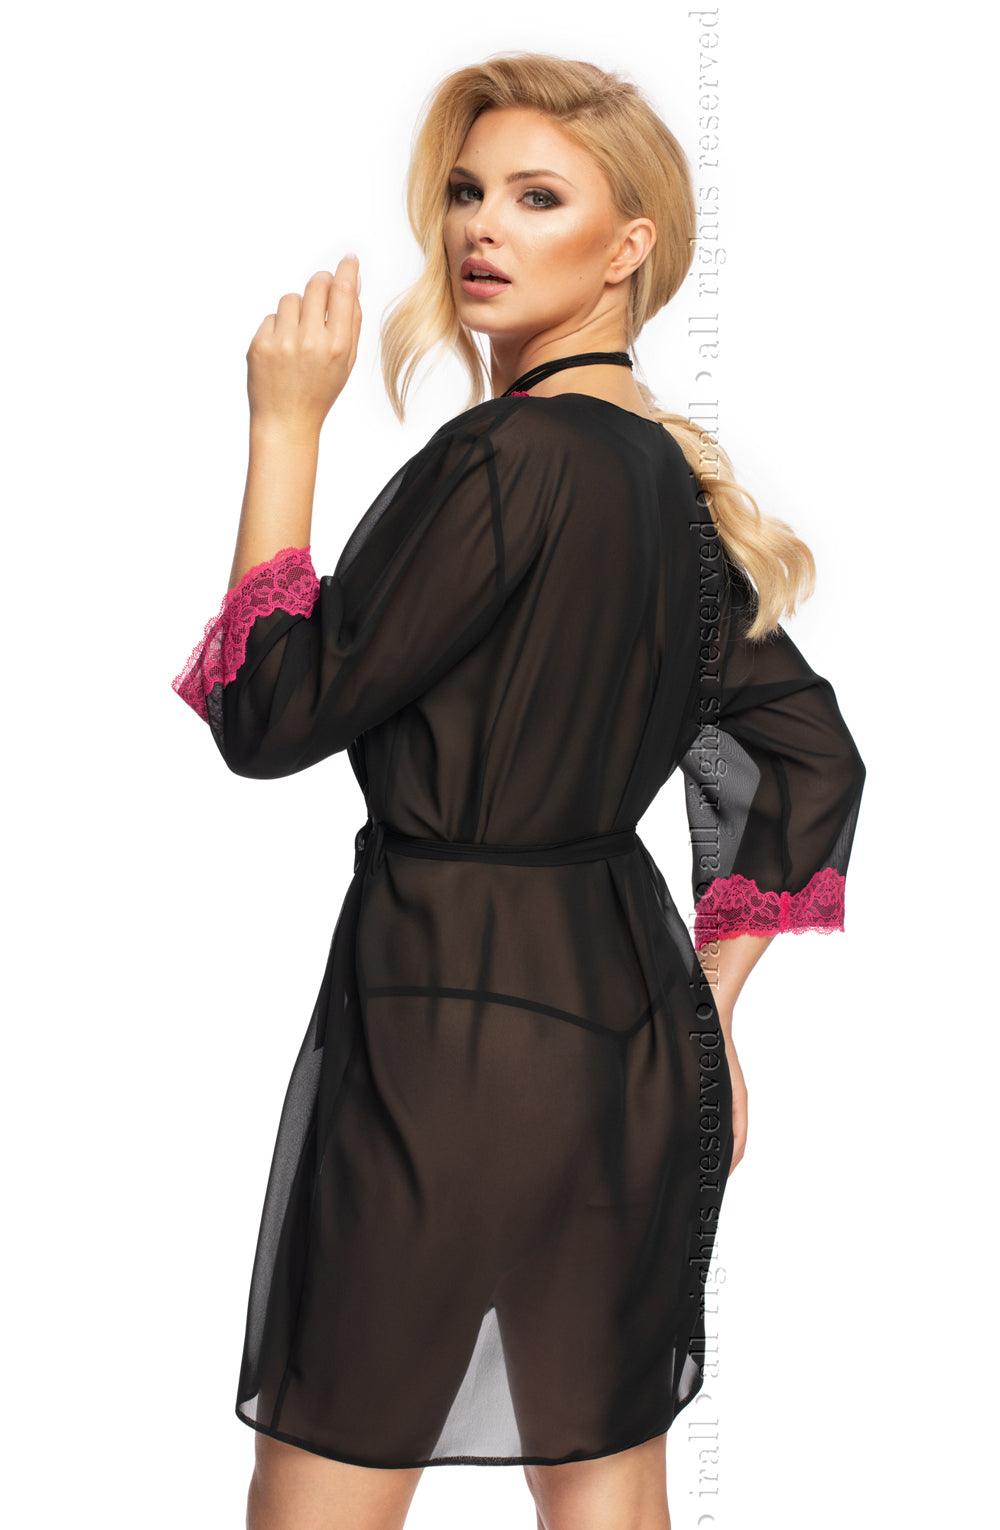 Irall Erotic Flavia Dressing Gown - Sydney Rose Lingerie 